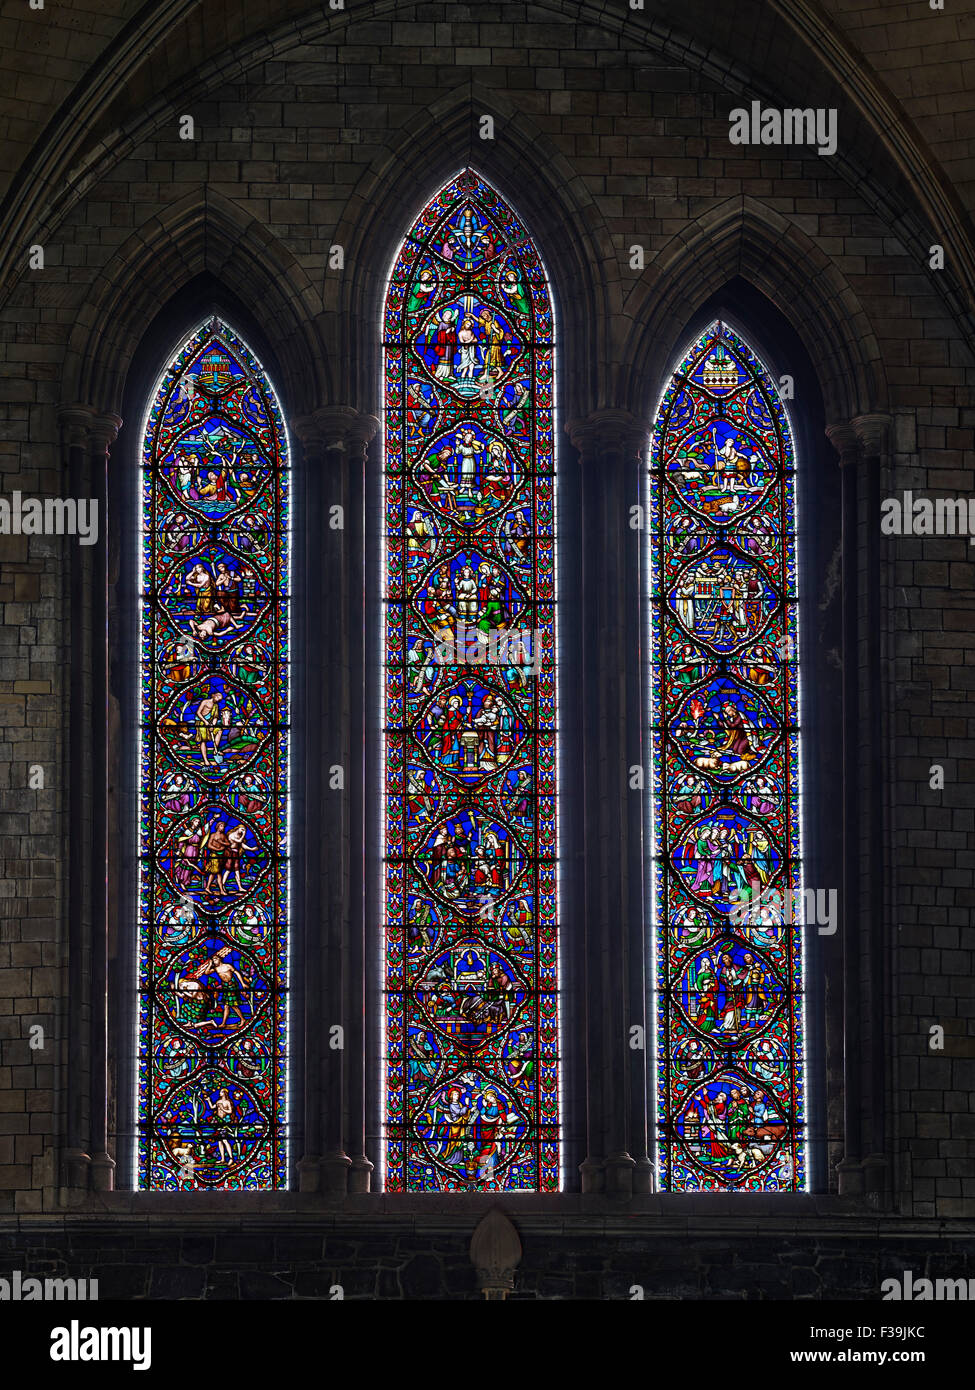 St Patrick's Cathedral south transept window Stock Photo